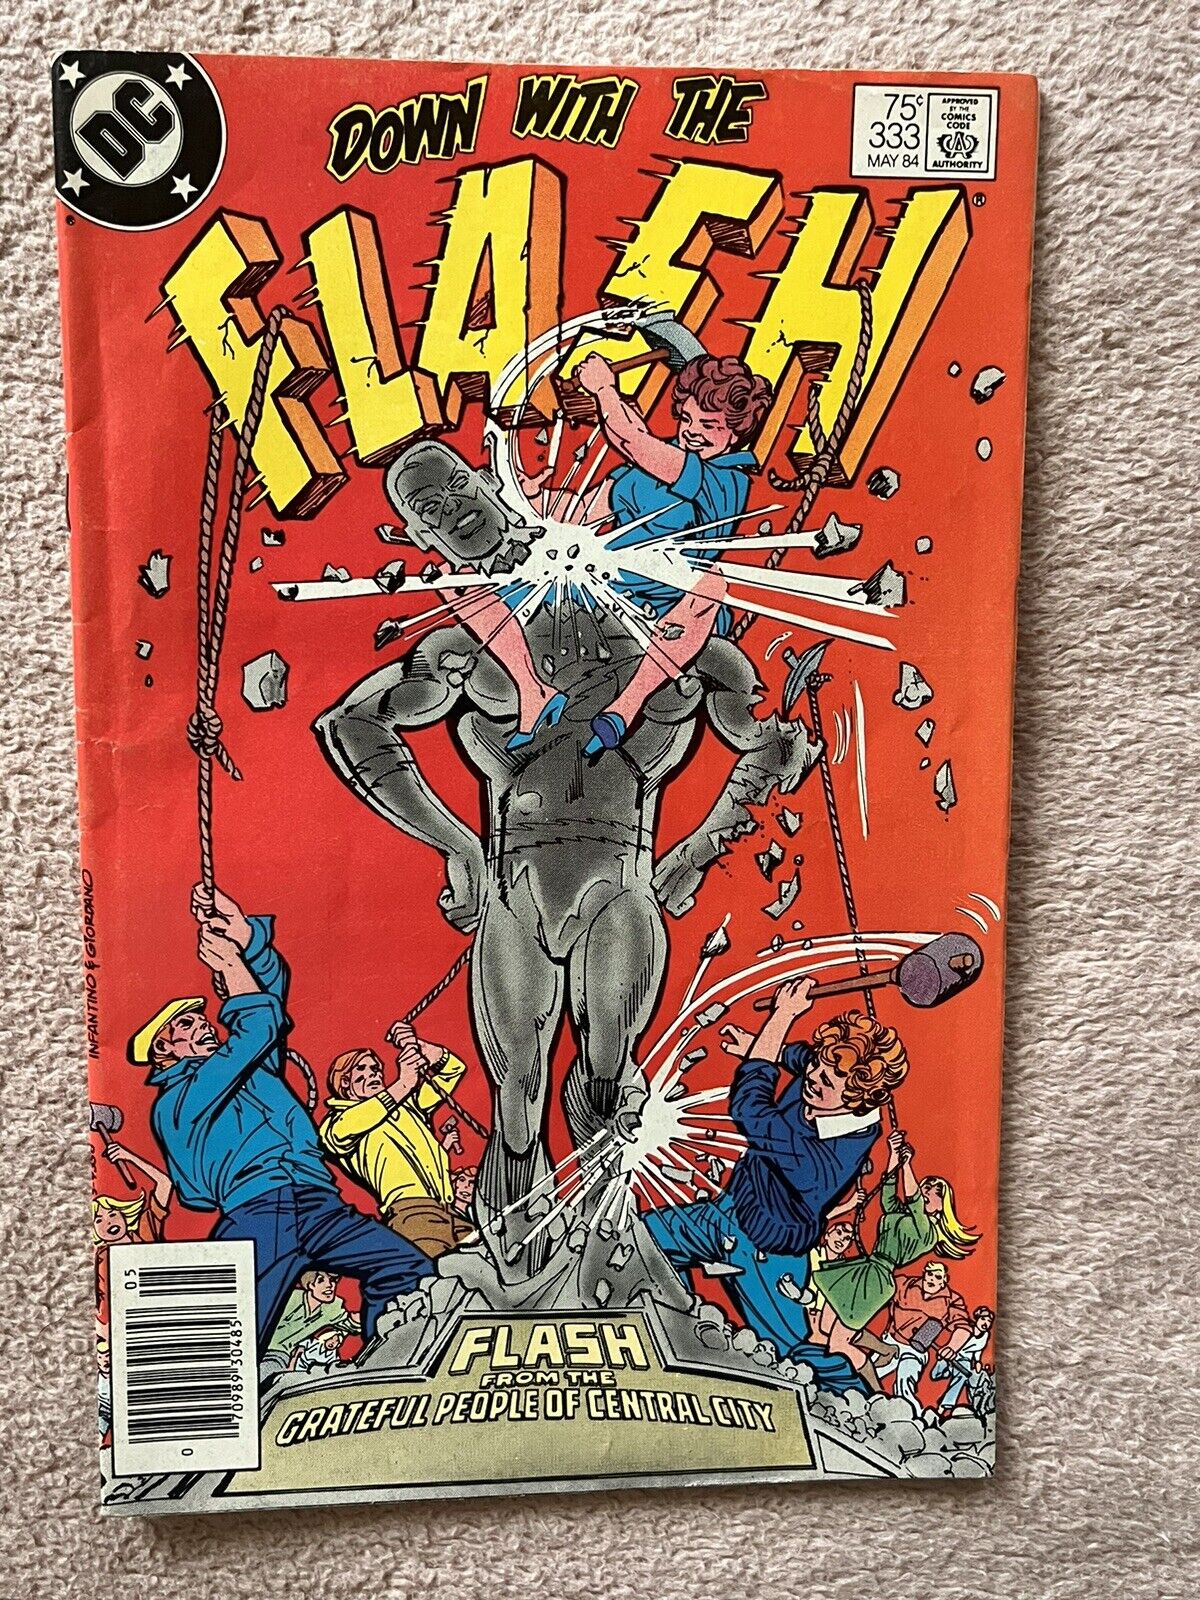 Flash Down With The Flash ￼#333, DC comics, 1984 NEWSTAND EDITION